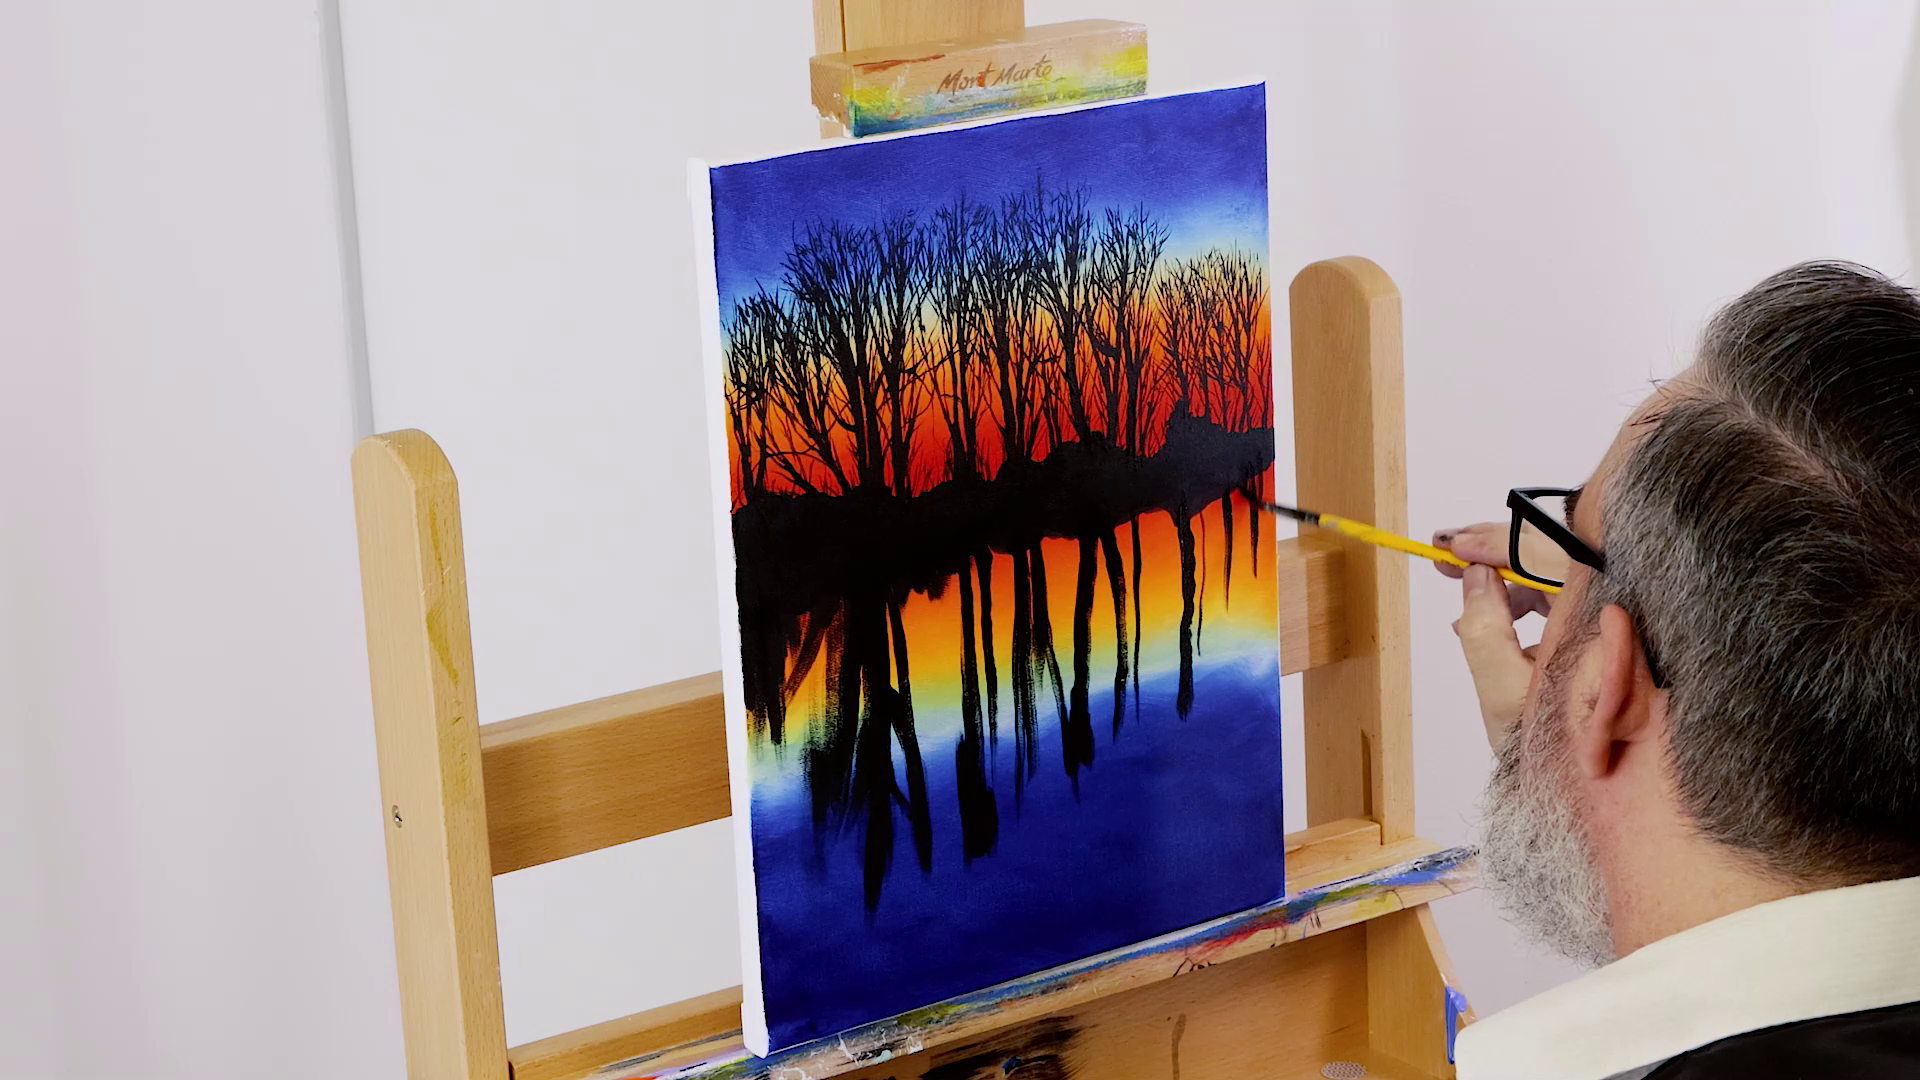 How To Paint A Sunset - Step By Step Acrylic Tutorial For Beginners  Diy  canvas art painting, Beginner painting, Simple acrylic paintings